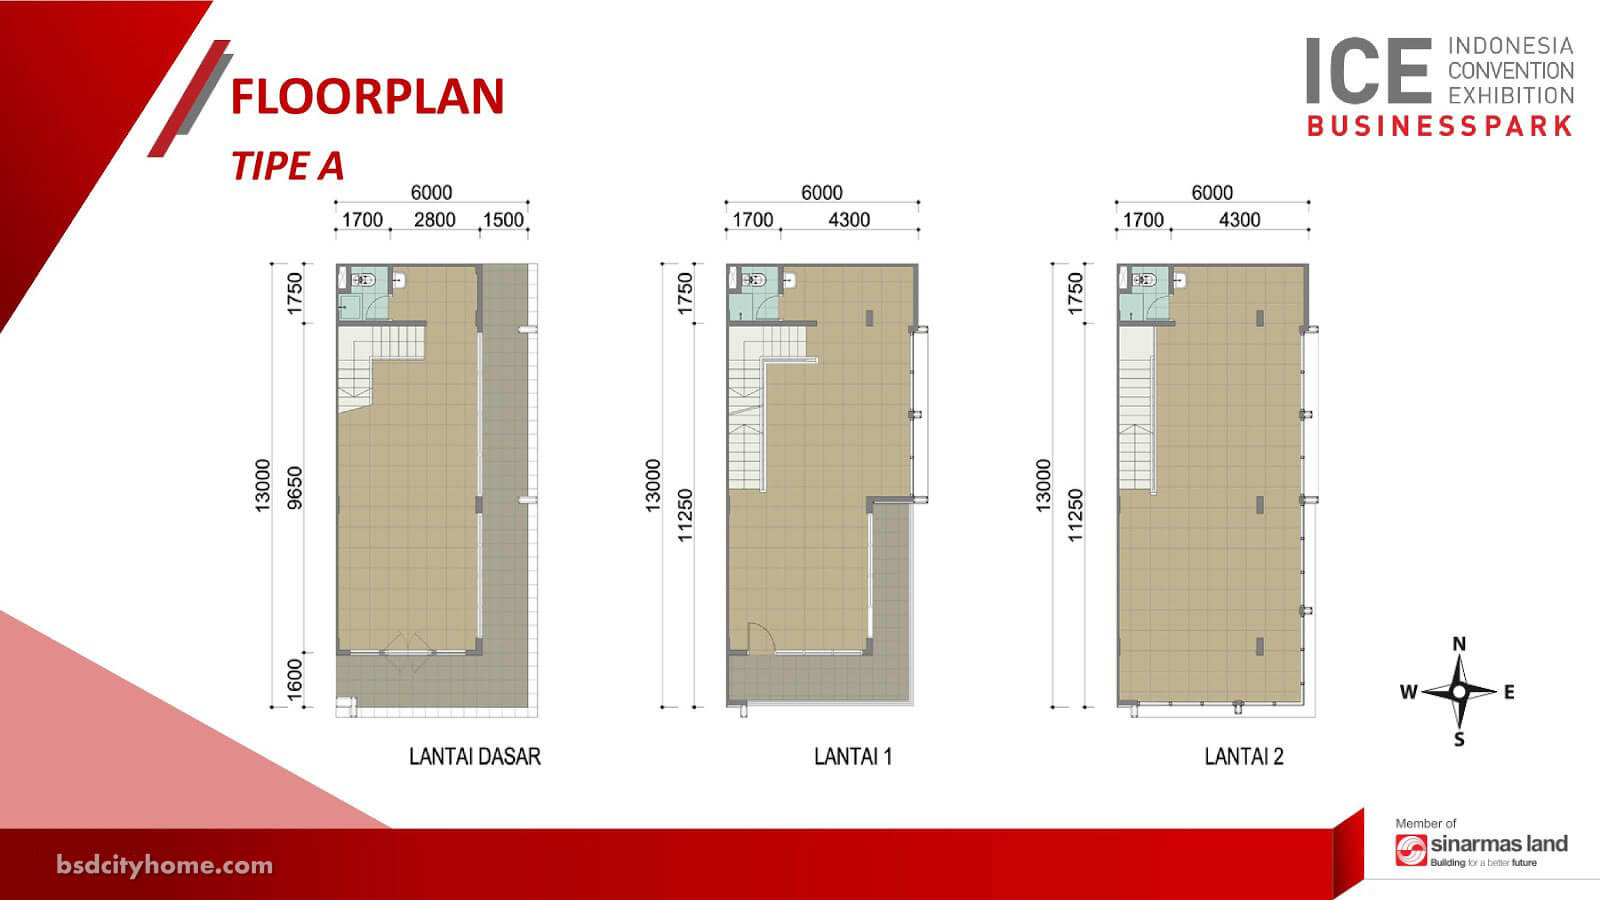 Site Plan ICE Business Park Tipe A